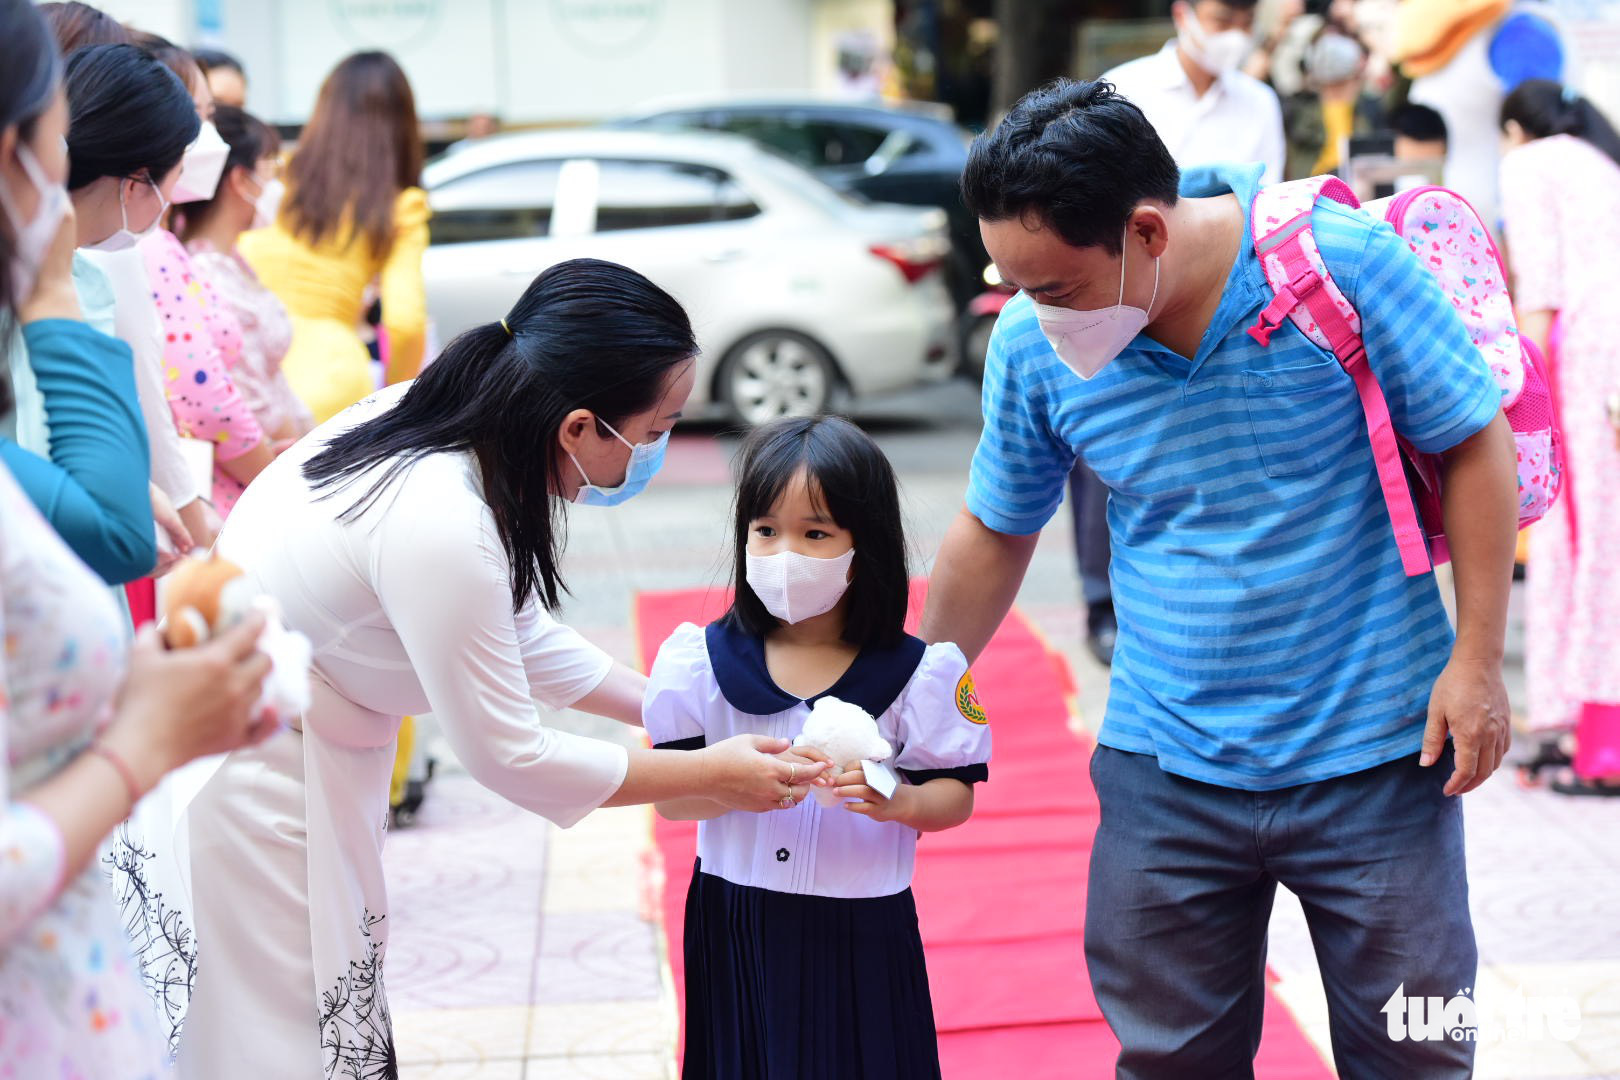 A first grader is welcomed by teachers at Nguyen Binh Khiem Street in District 1, Ho Chi Minh City, August 22, 2022. Photo: Duyen Phan / Tuoi Tre